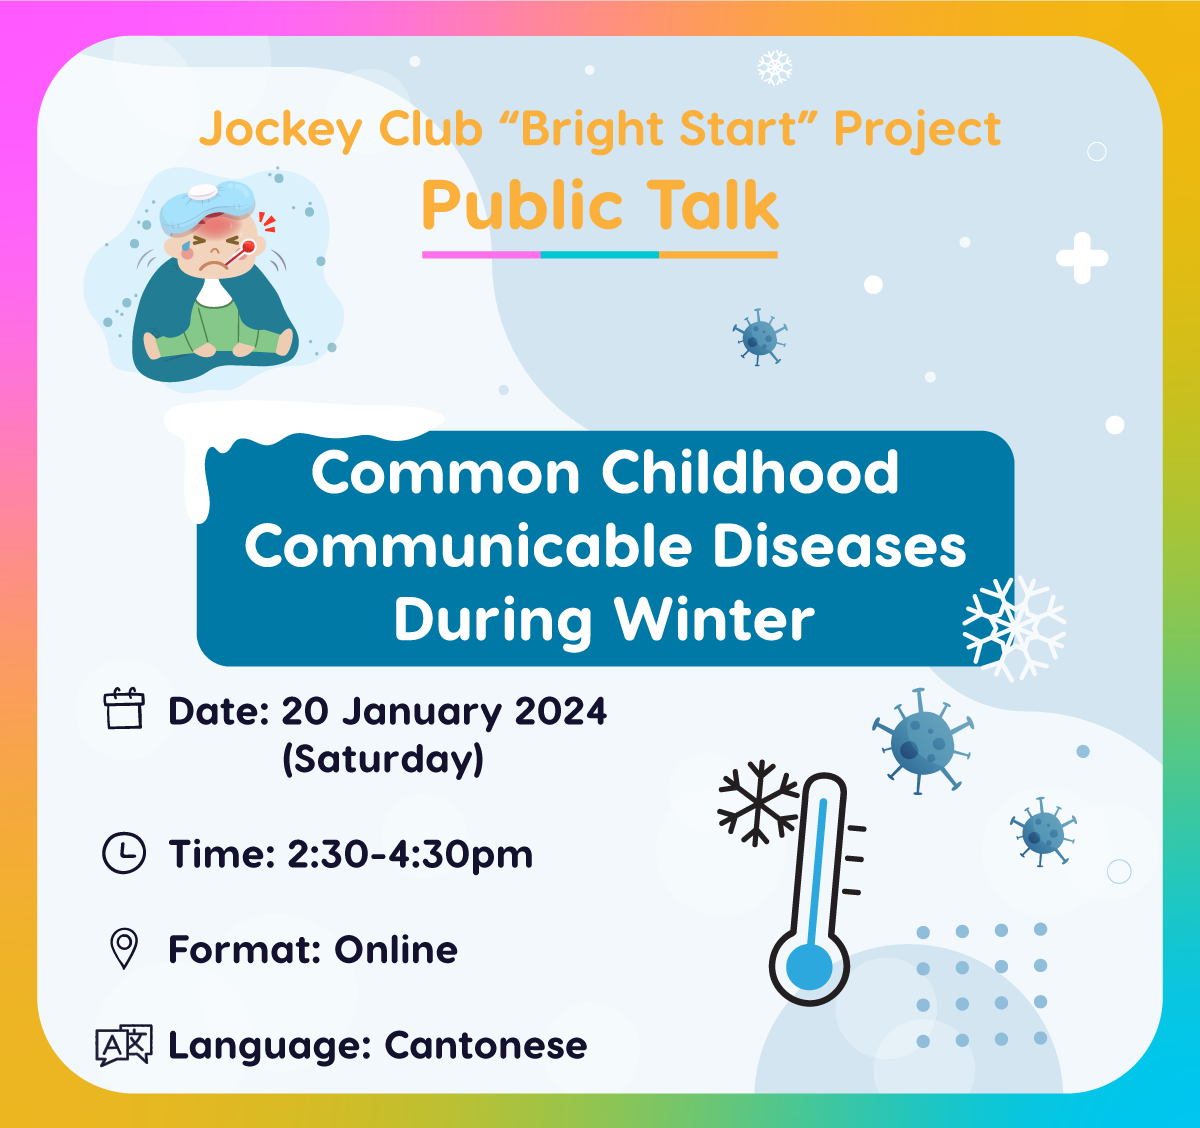 Common Childhood Communicable Diseases During Winter